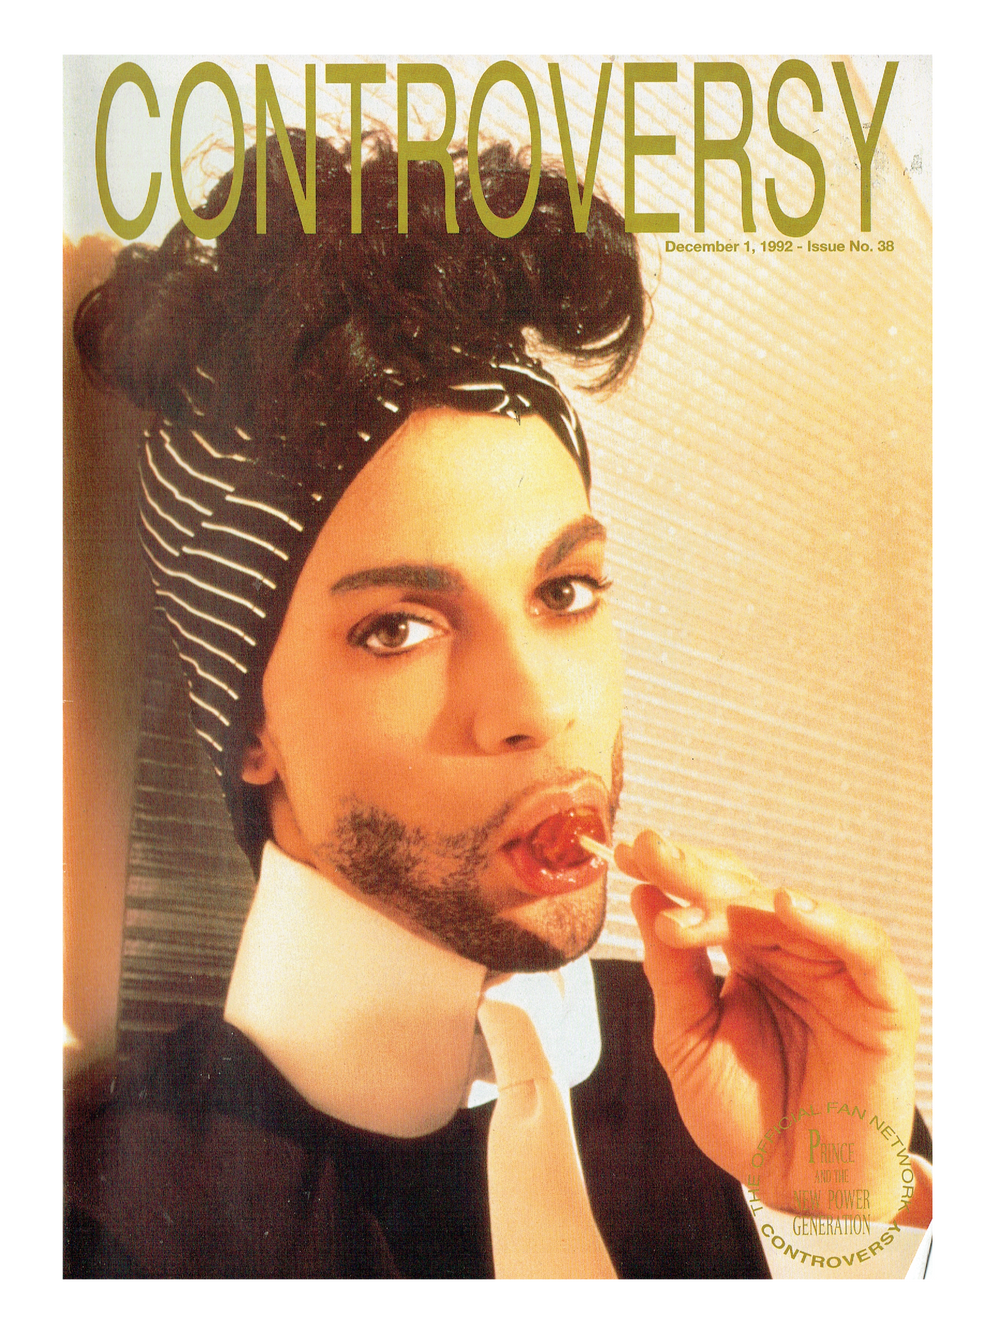 Prince Controversy Fanzine 22 Pages Issue No.38 DECEMBER 1992